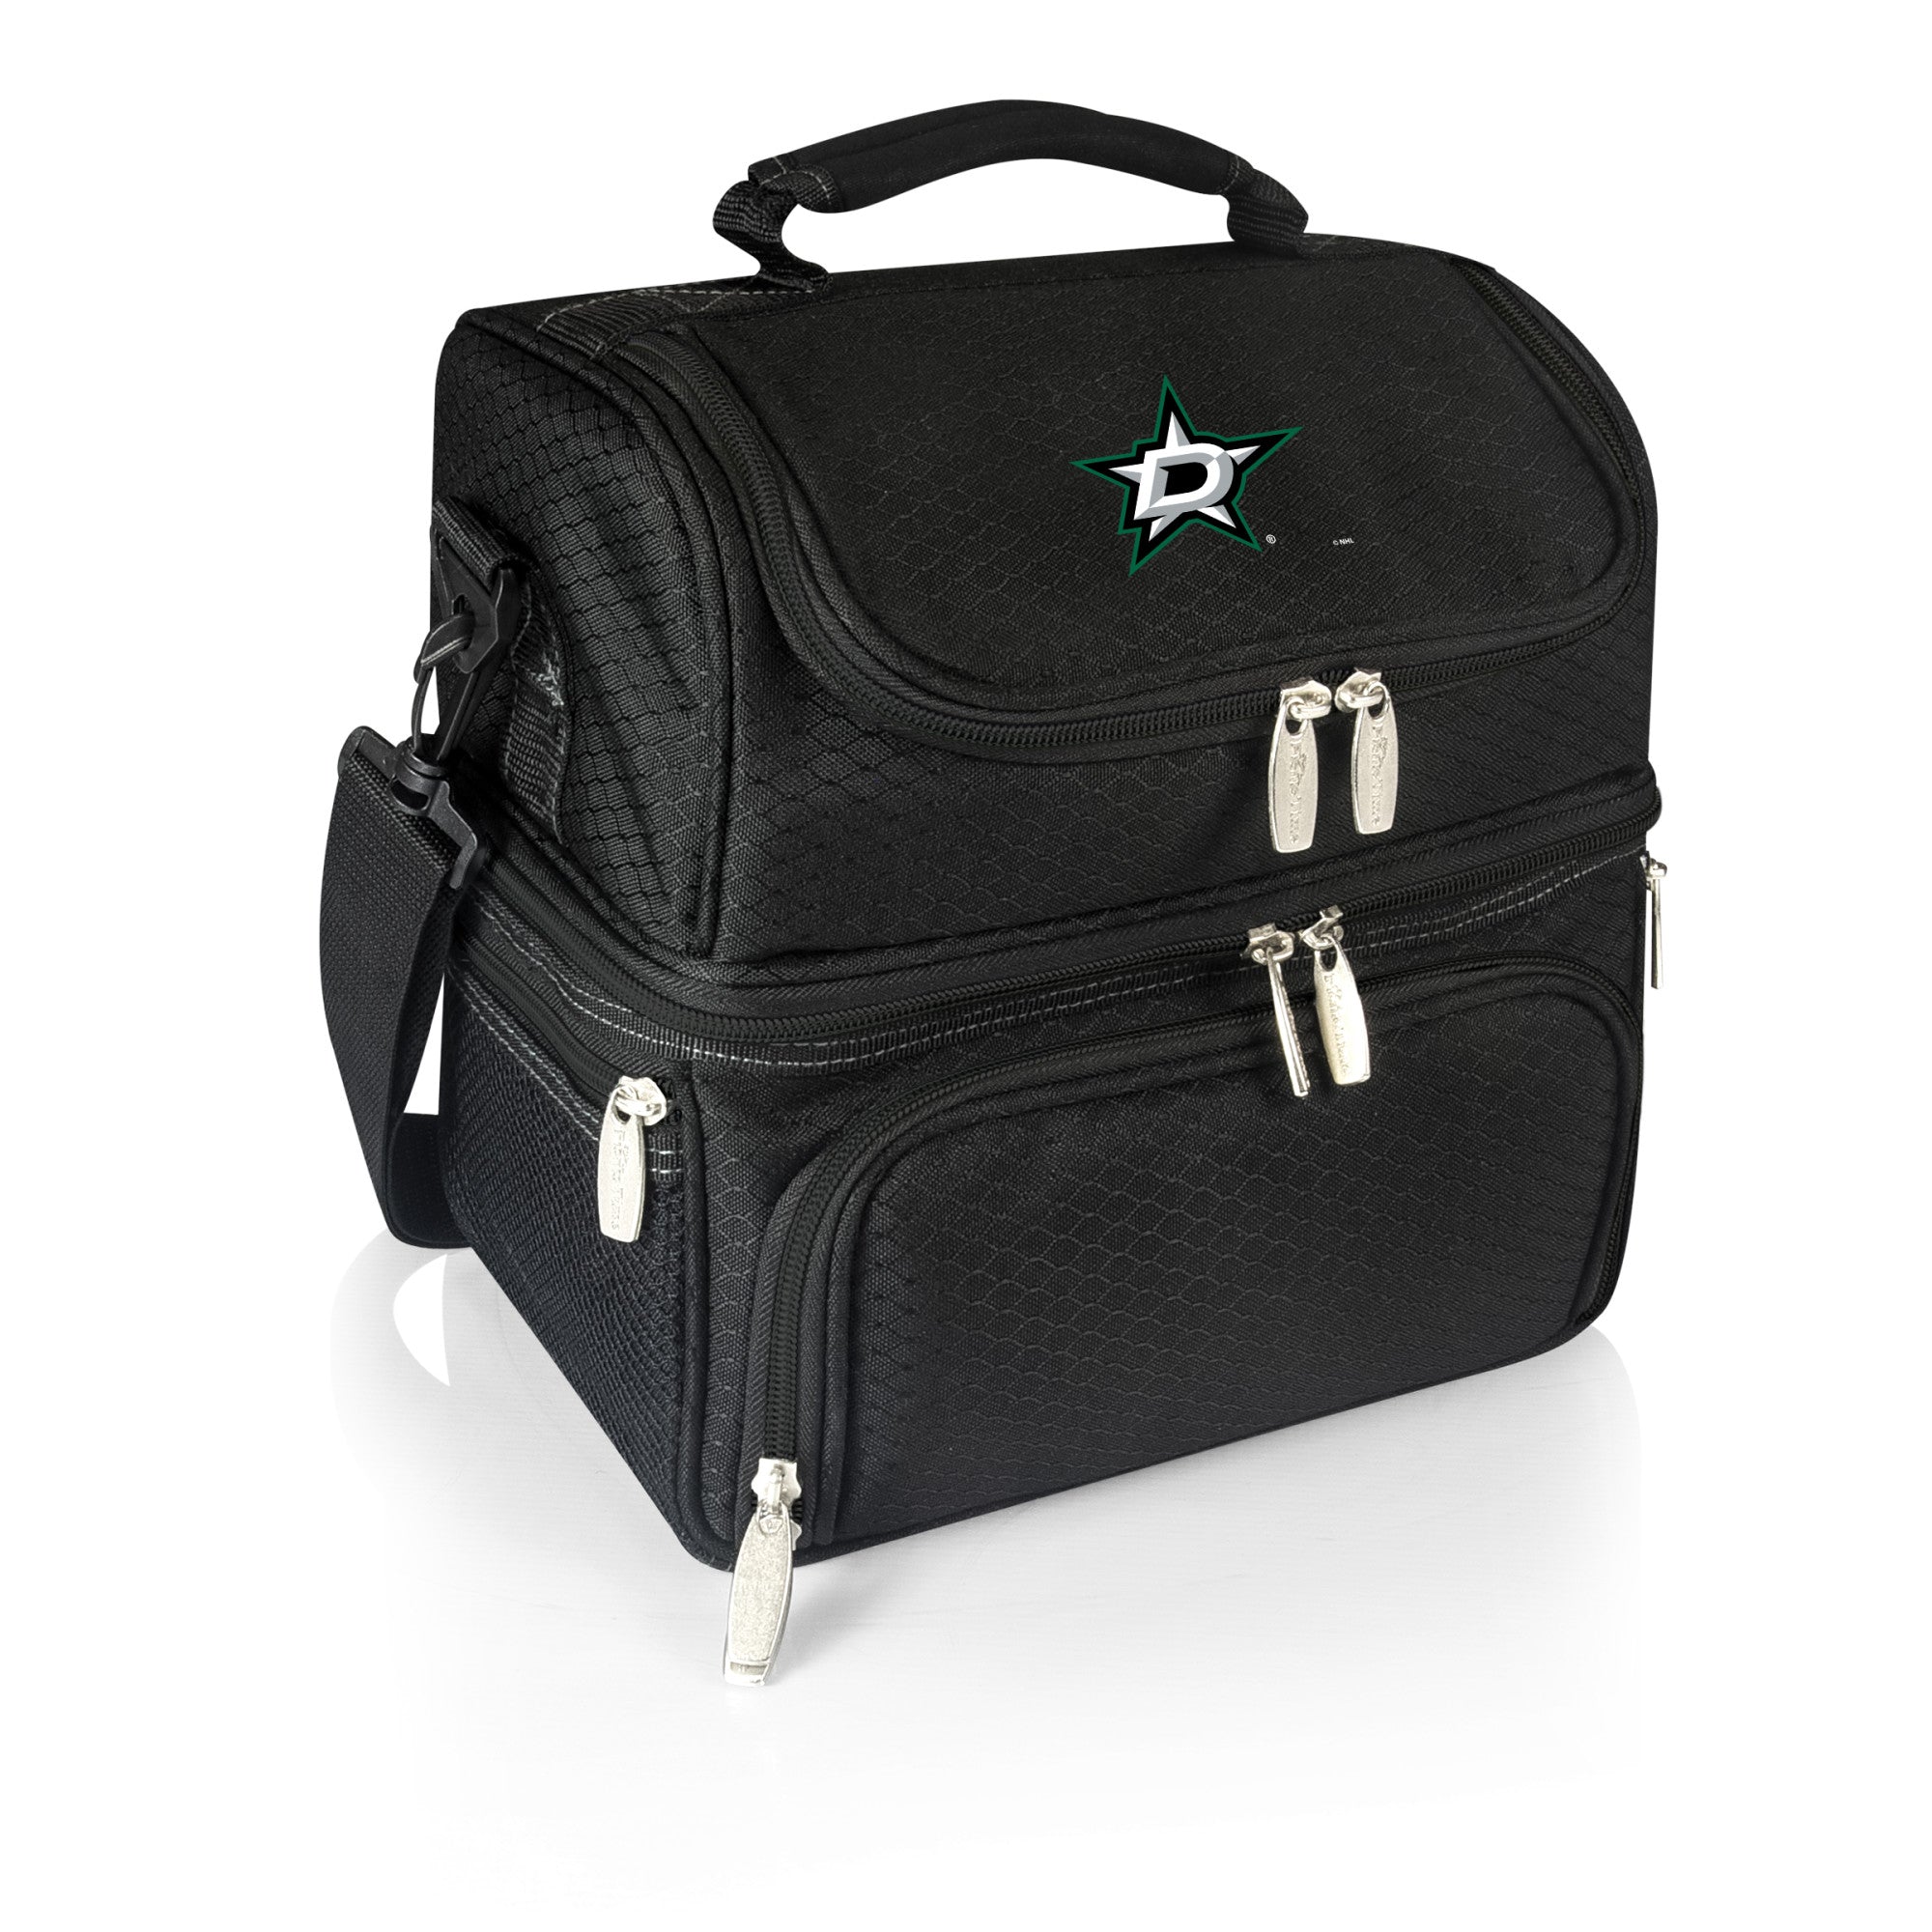 Dallas Stars - Pranzo Lunch Bag Cooler with Utensils